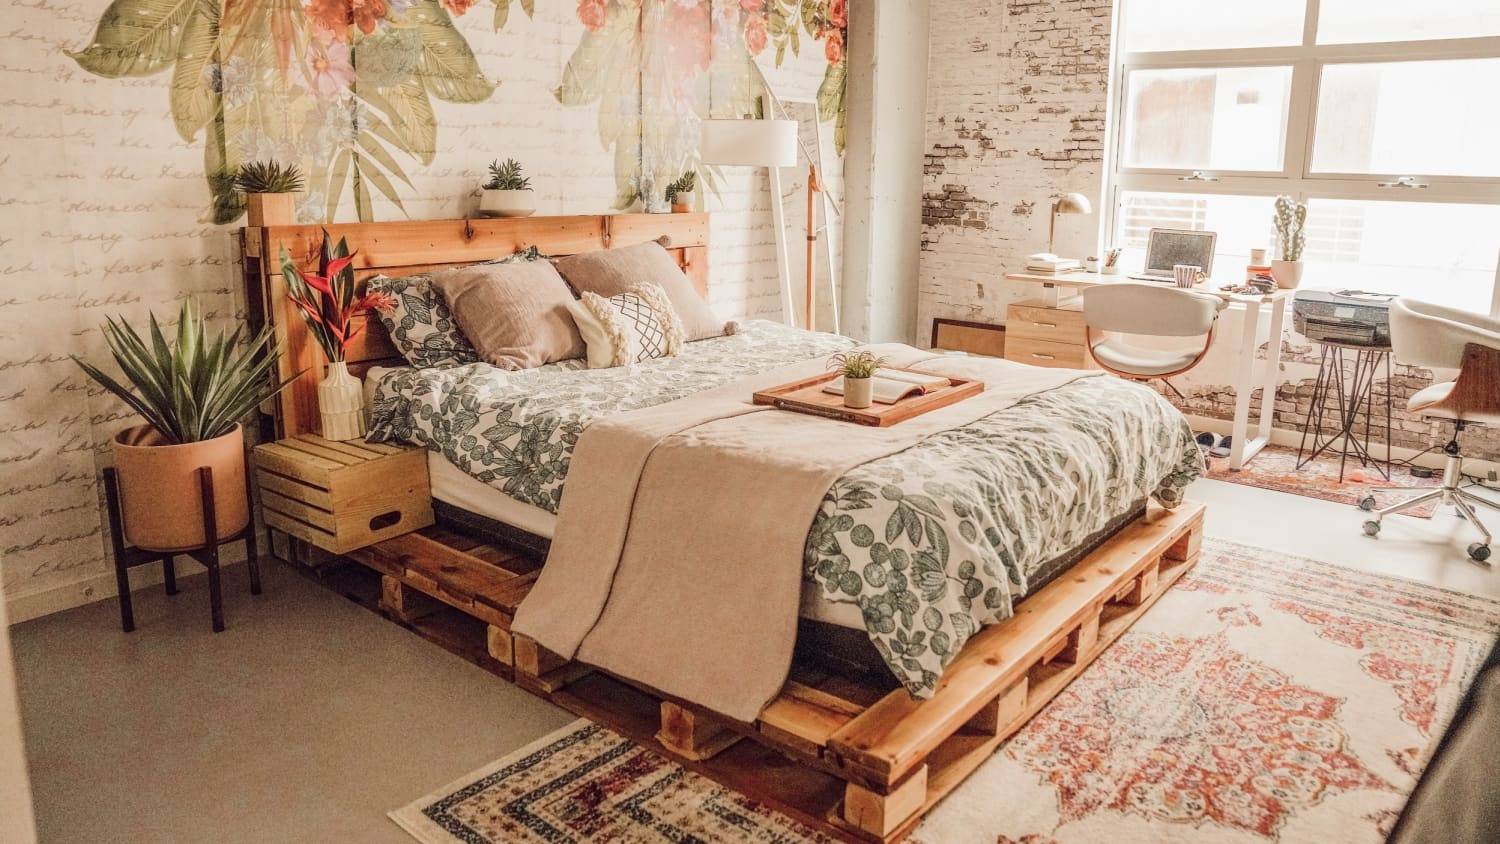 bed frame made from pallets